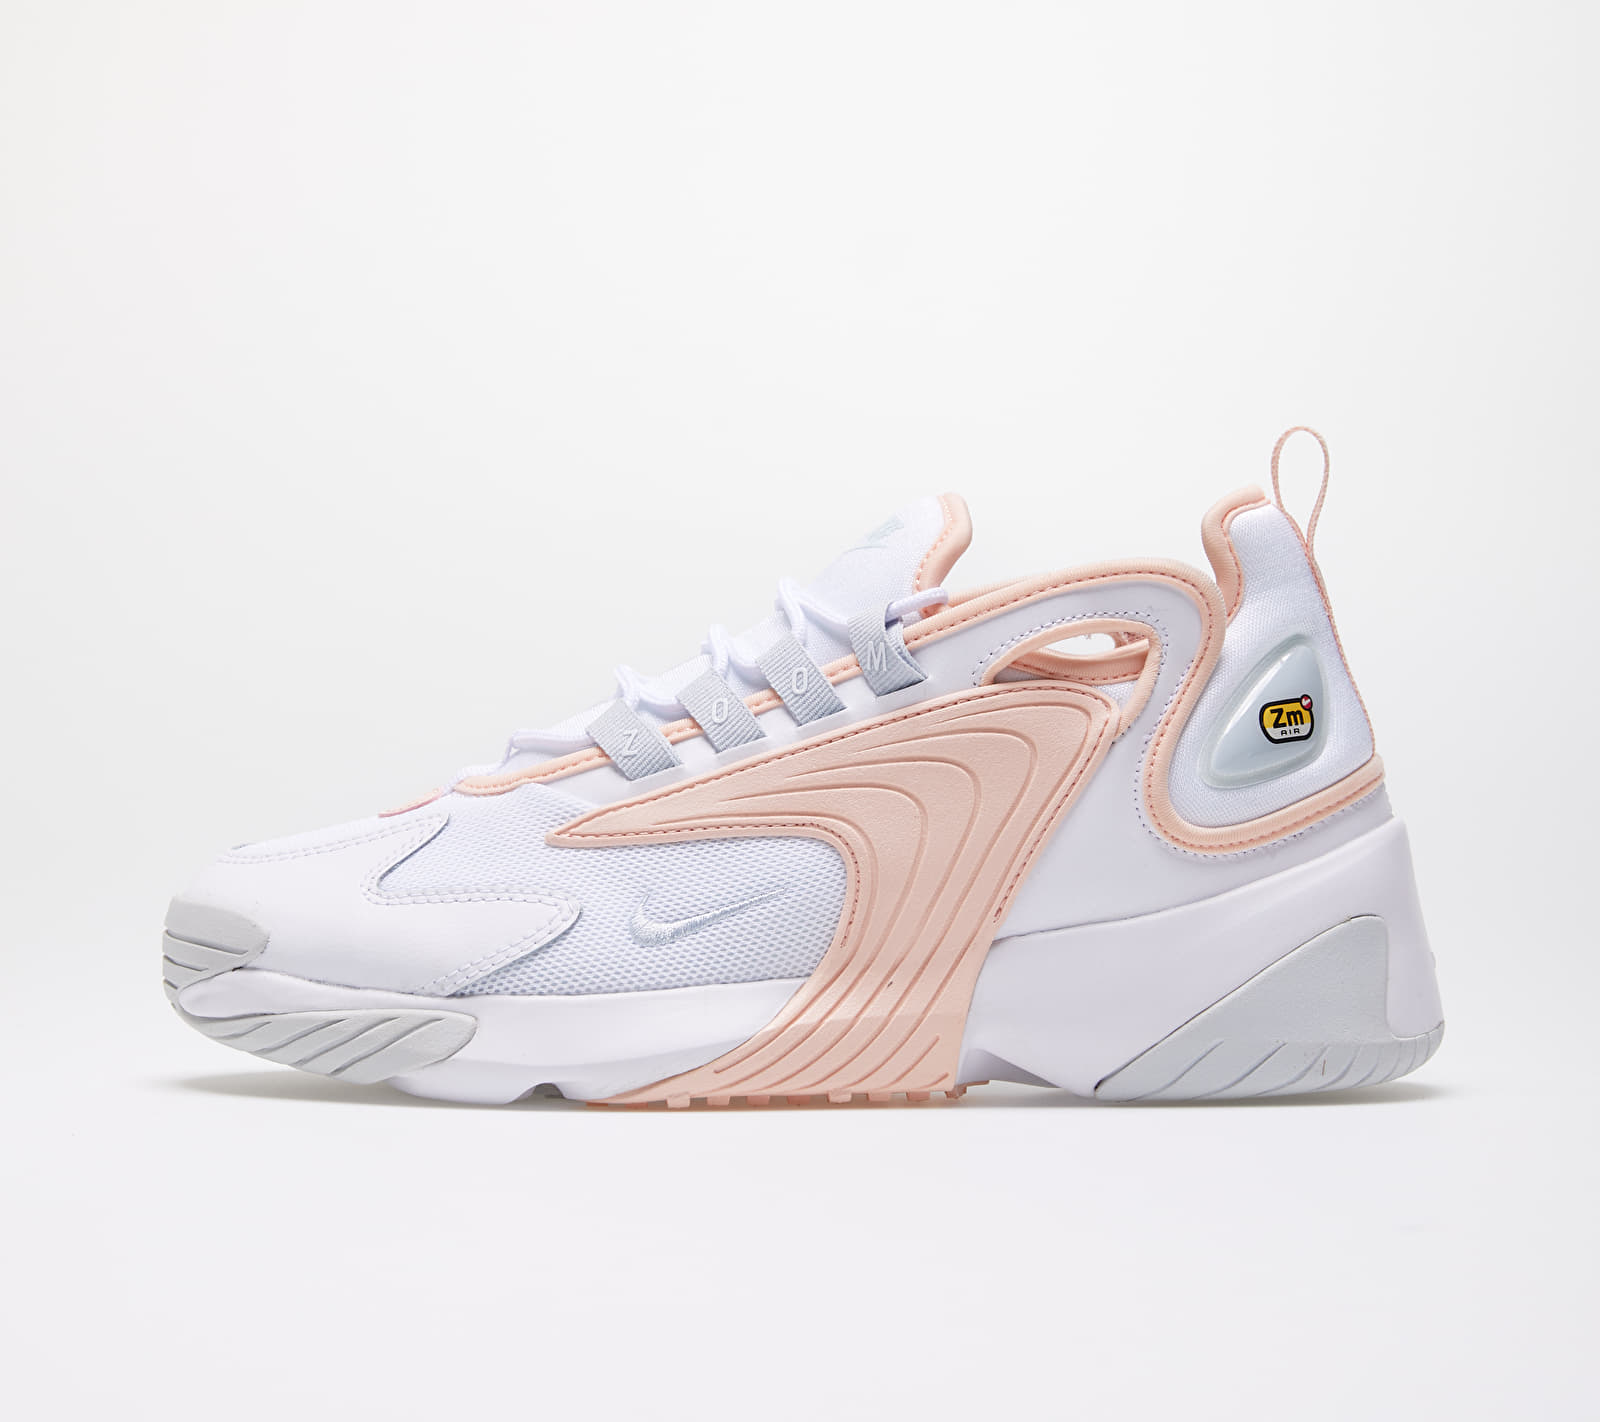 Nike Wmns Zoom 2K White/ Aura-Washed Coral